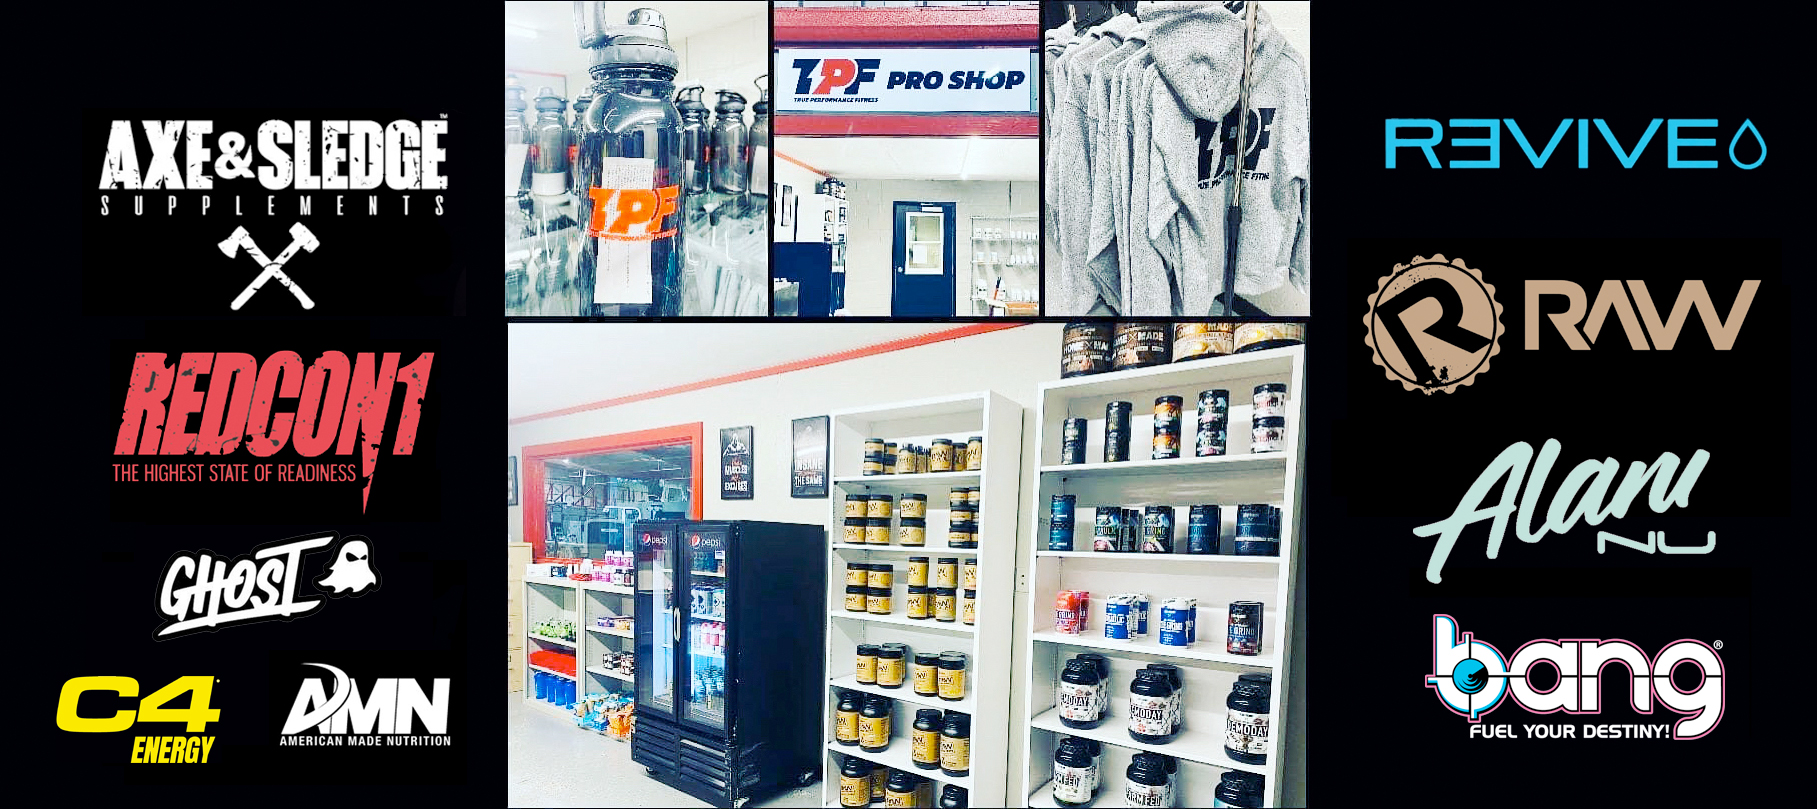 Pro Shop stocked with Supplements from Axe & Sledge, RAW, Redcon1, Revive, and AMN. Alani Nu and Bang energy drinks.